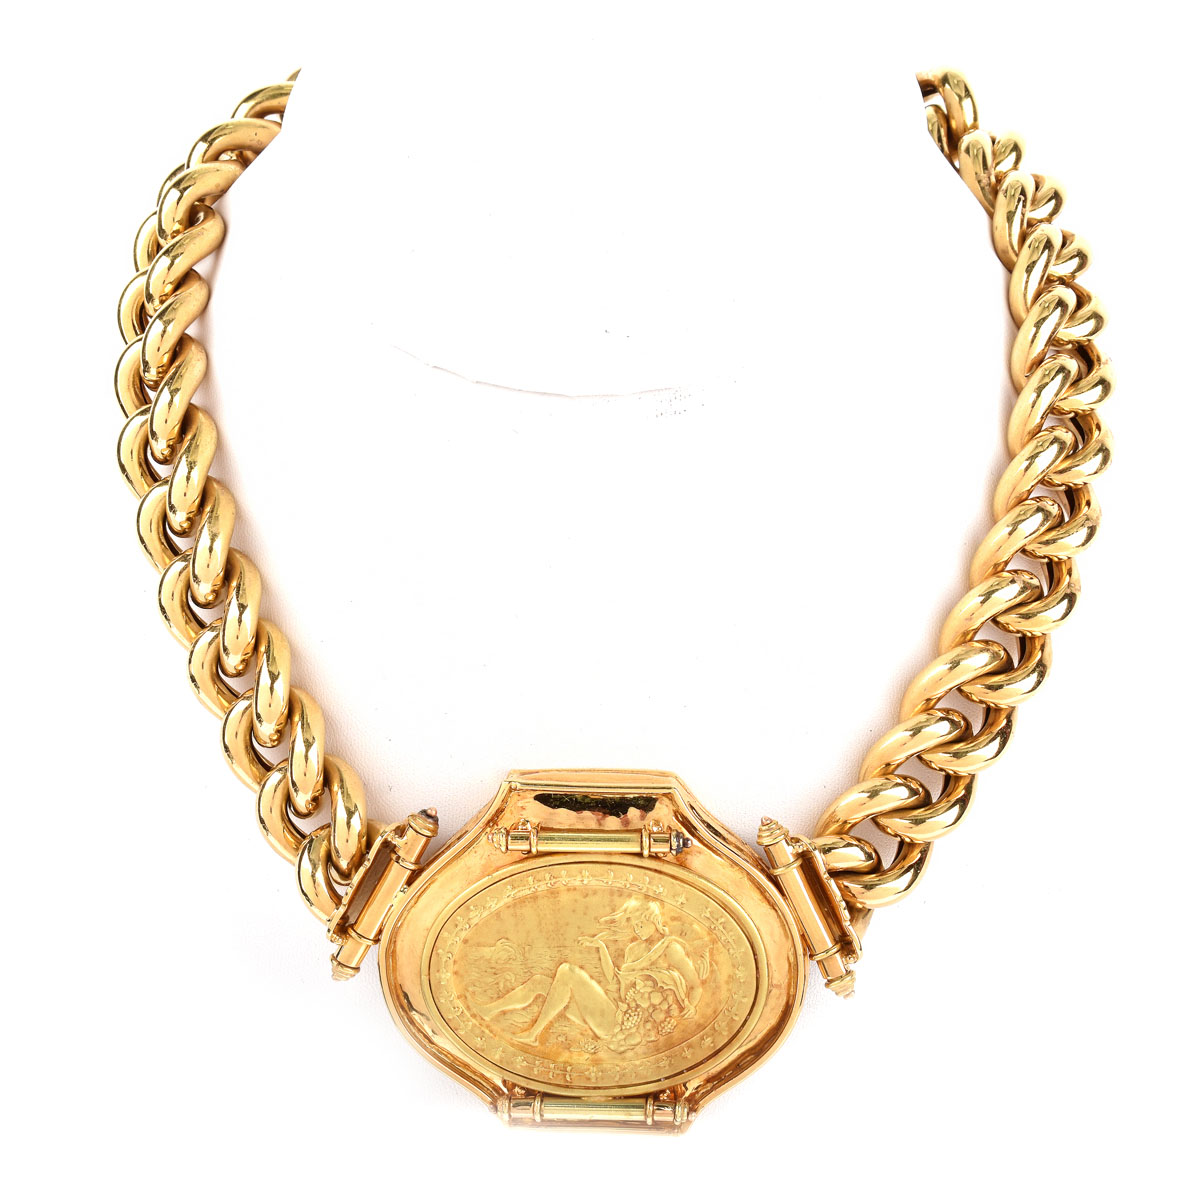 Vintage Italian Large 18 Karat Yellow Gold Link Pendant Necklace with Classical Relief Medallion Pendant. Stamped 750, Italian hallmark.